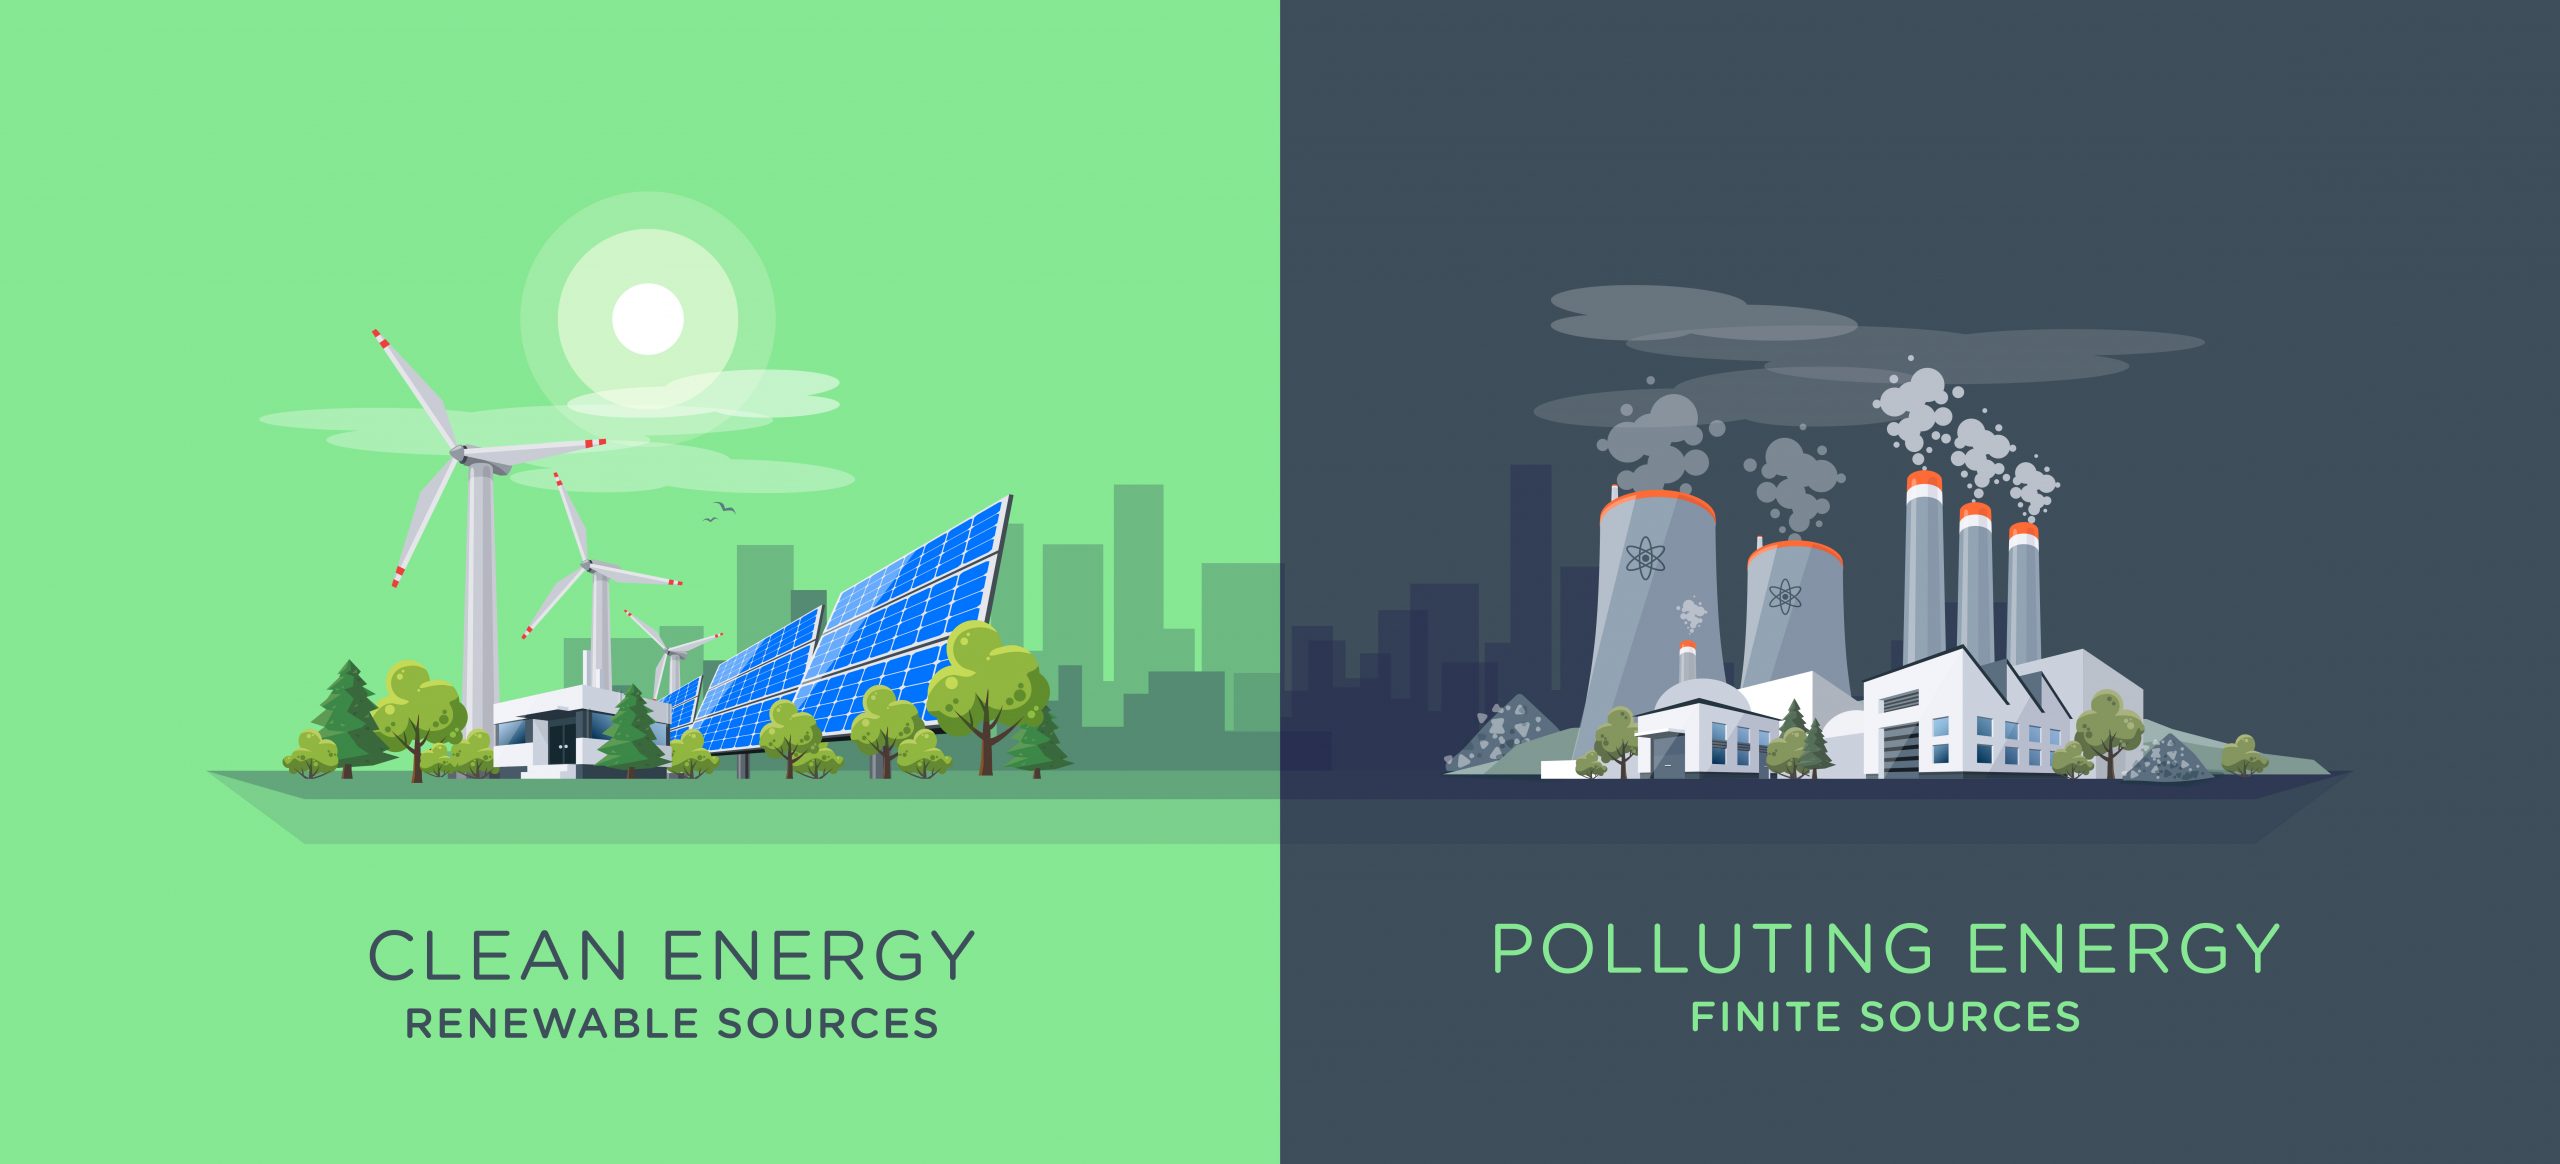 illustration showing clean and polluting electricity generation production. Polluting fossil thermal coal and nuclear power plants versus clean solar panels and wind turbines renewable energy.